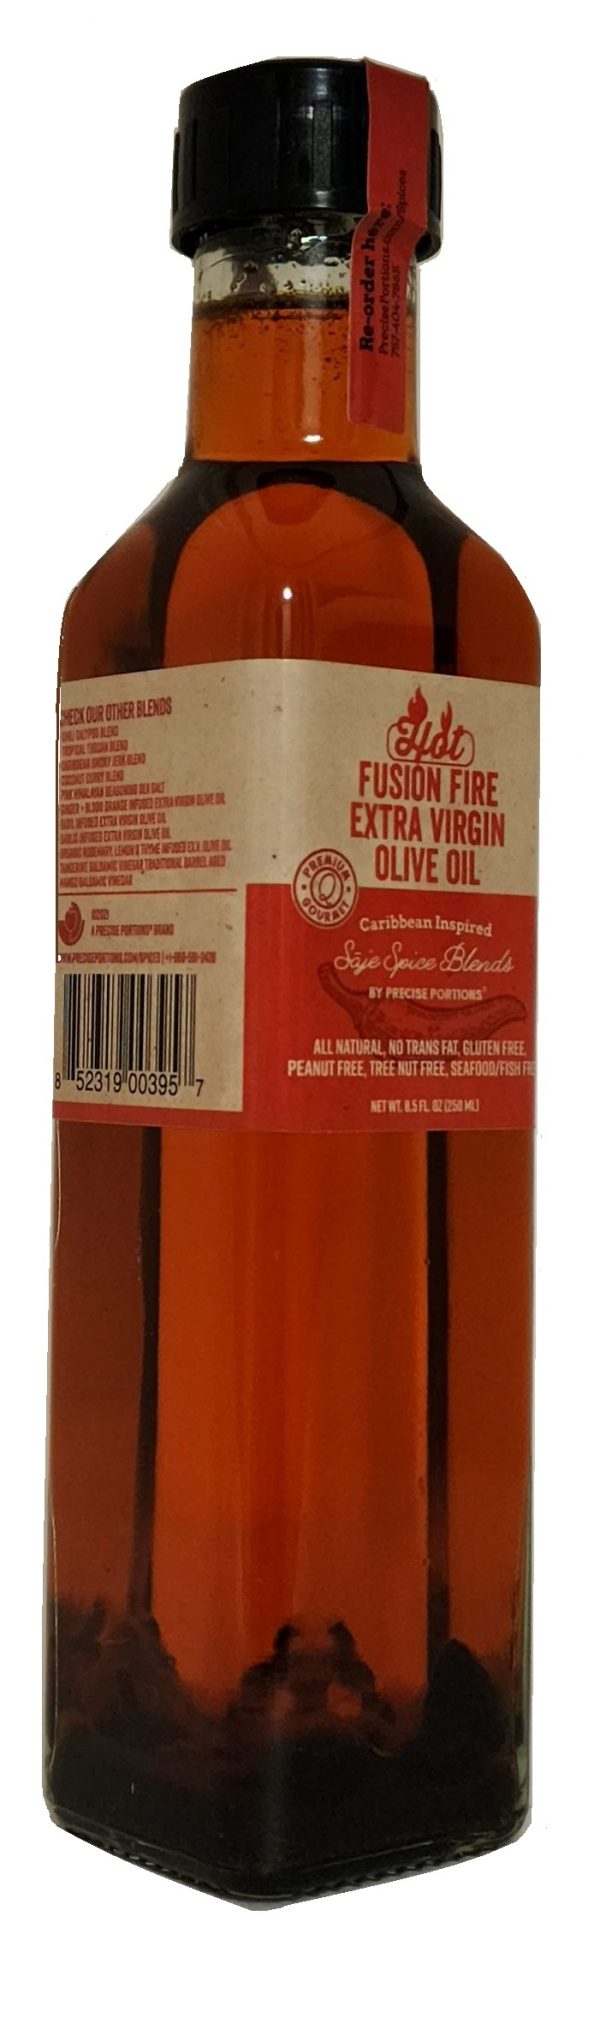 Fusion_Fire_Infuse_Extra_Virgin_Olive_Oil